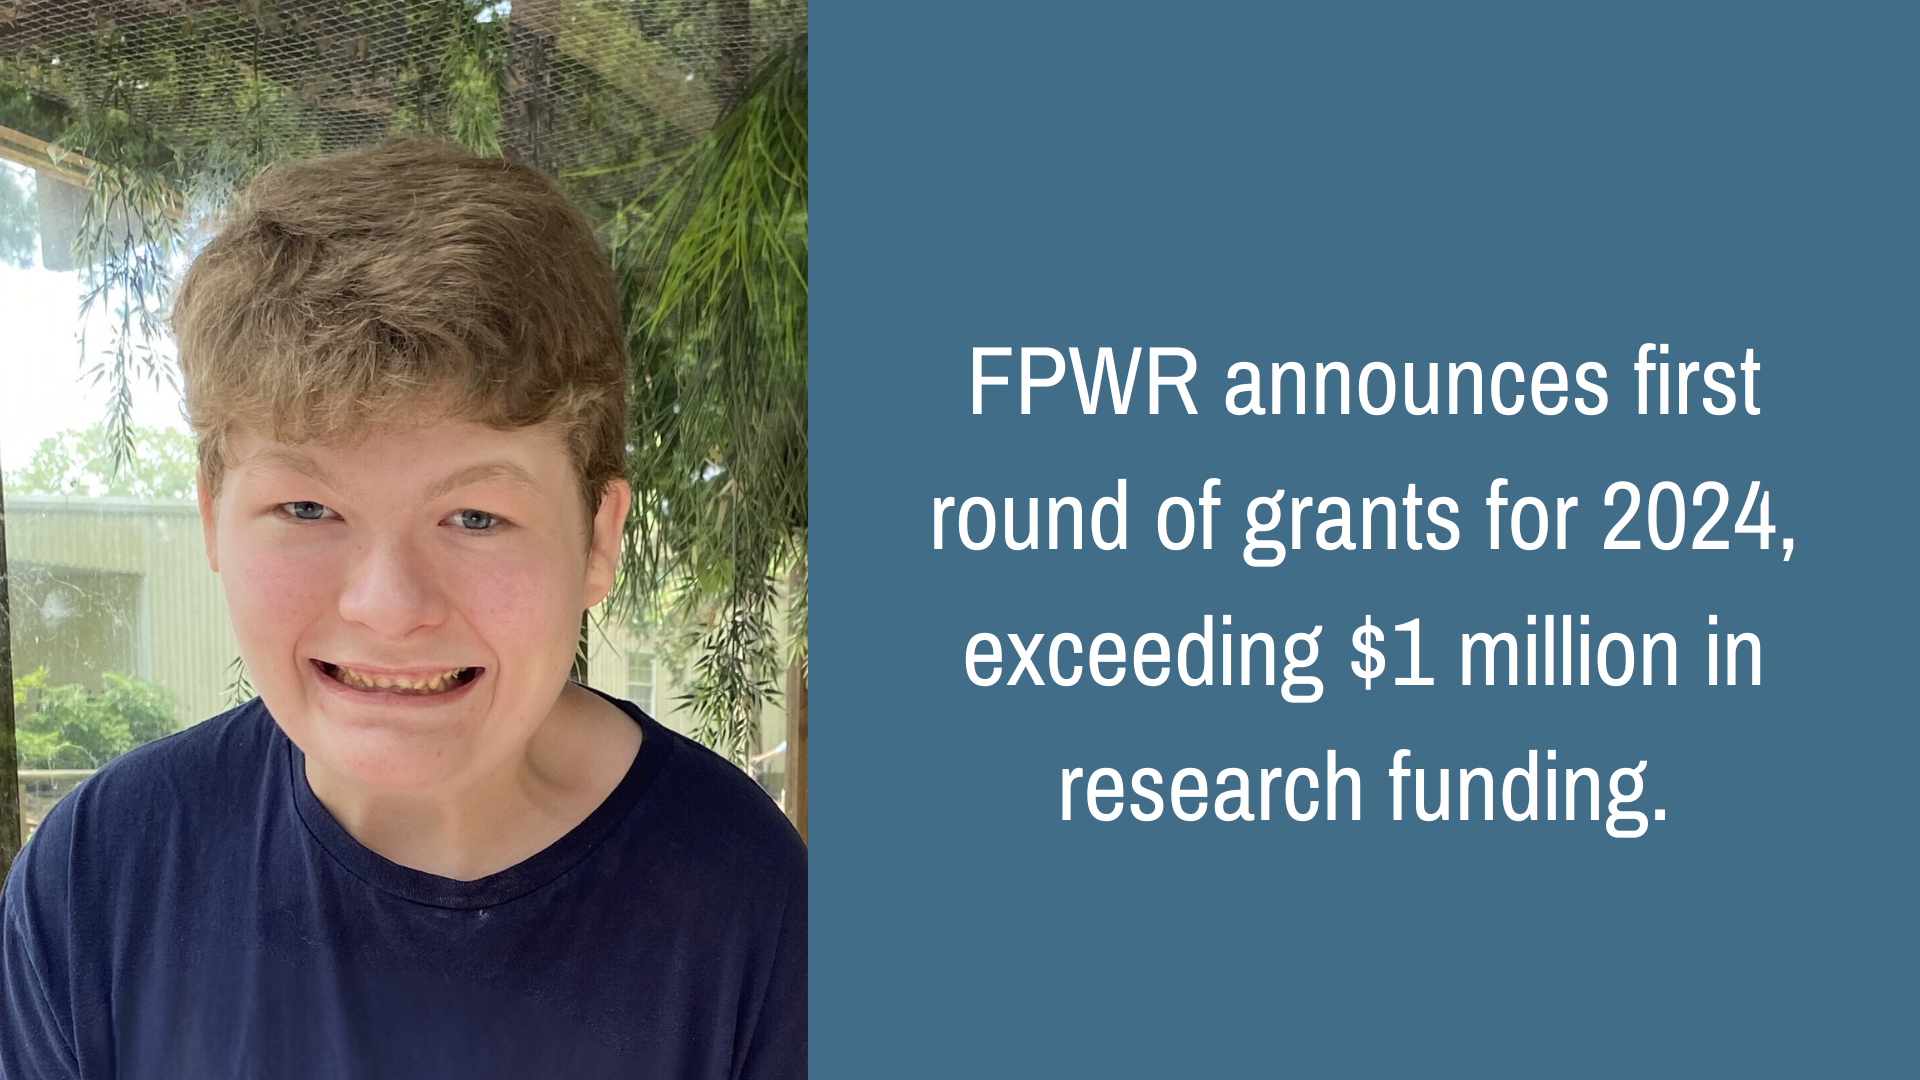 FPWR Announces 1st Round of 2024 Grants